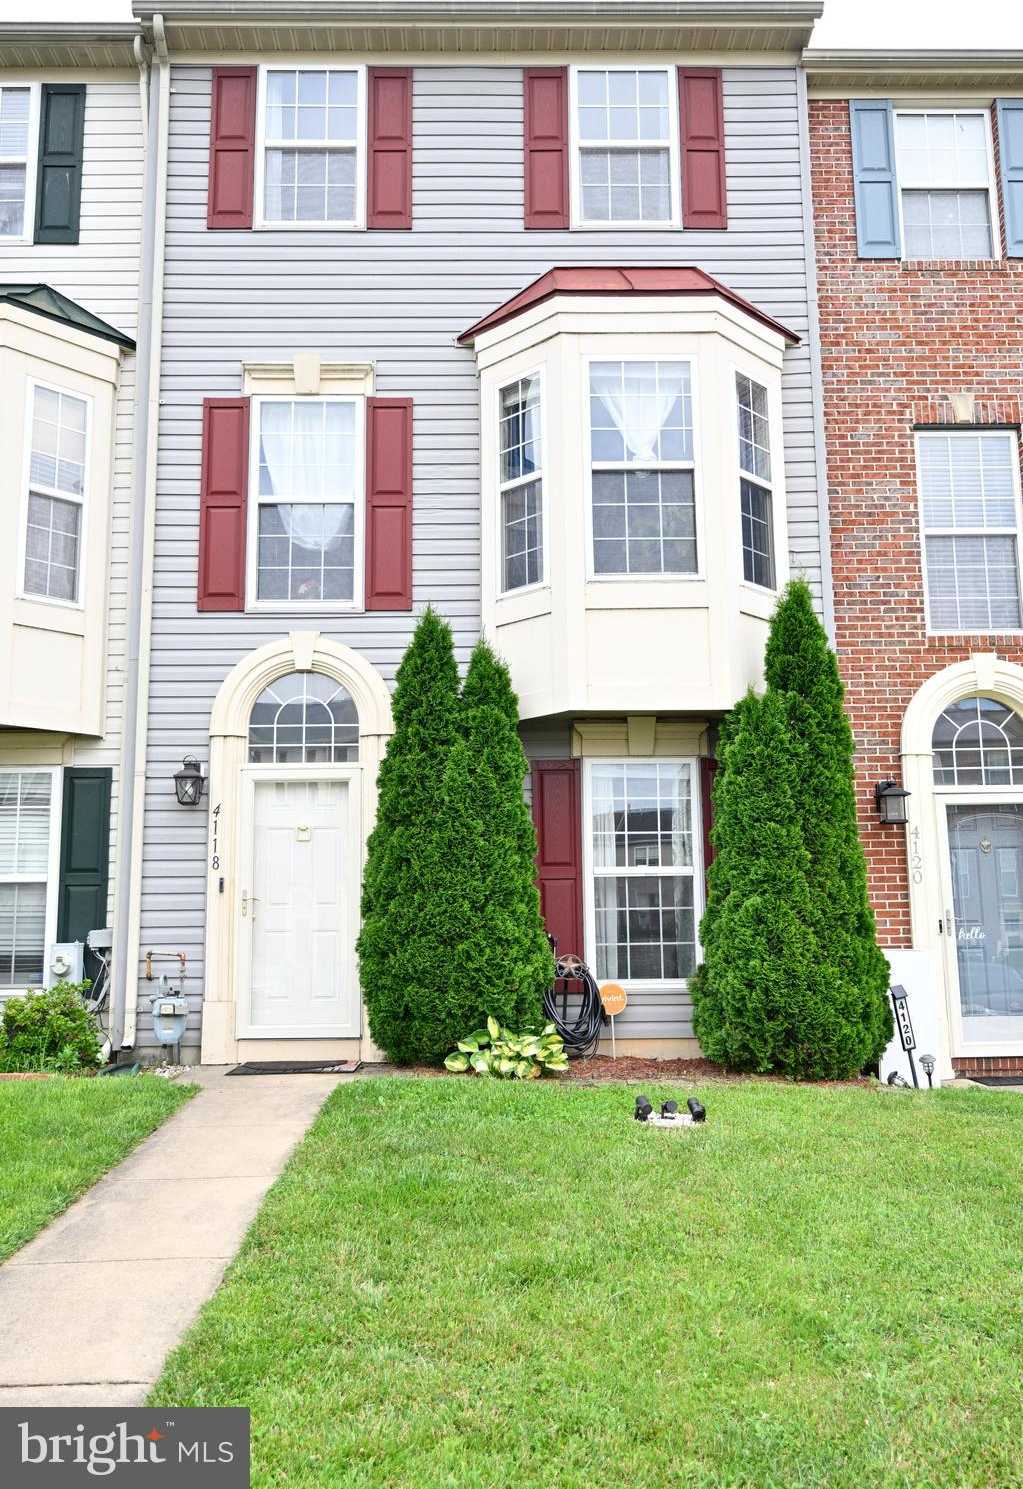 View BALTIMORE, MD 21220 townhome